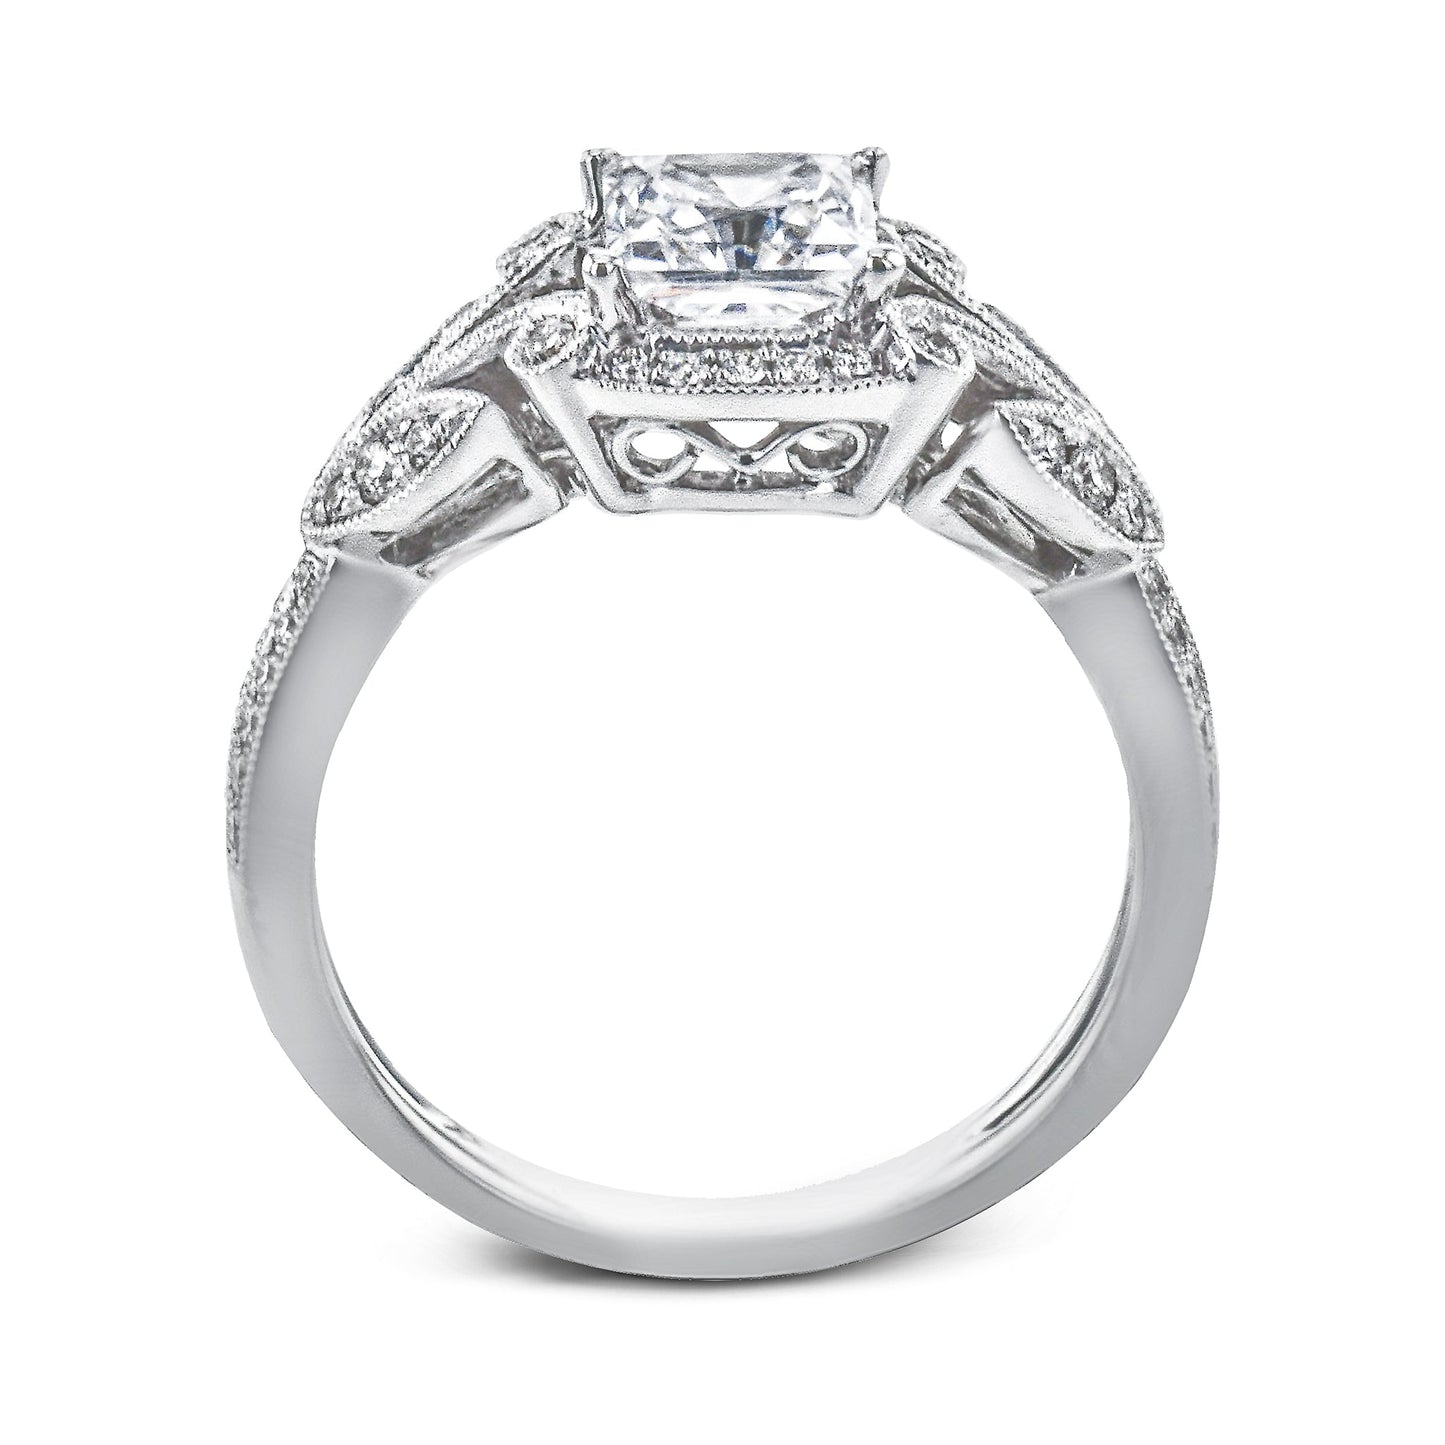 Princess-Cut Halo Engagement Ring In 18k Gold With Diamonds